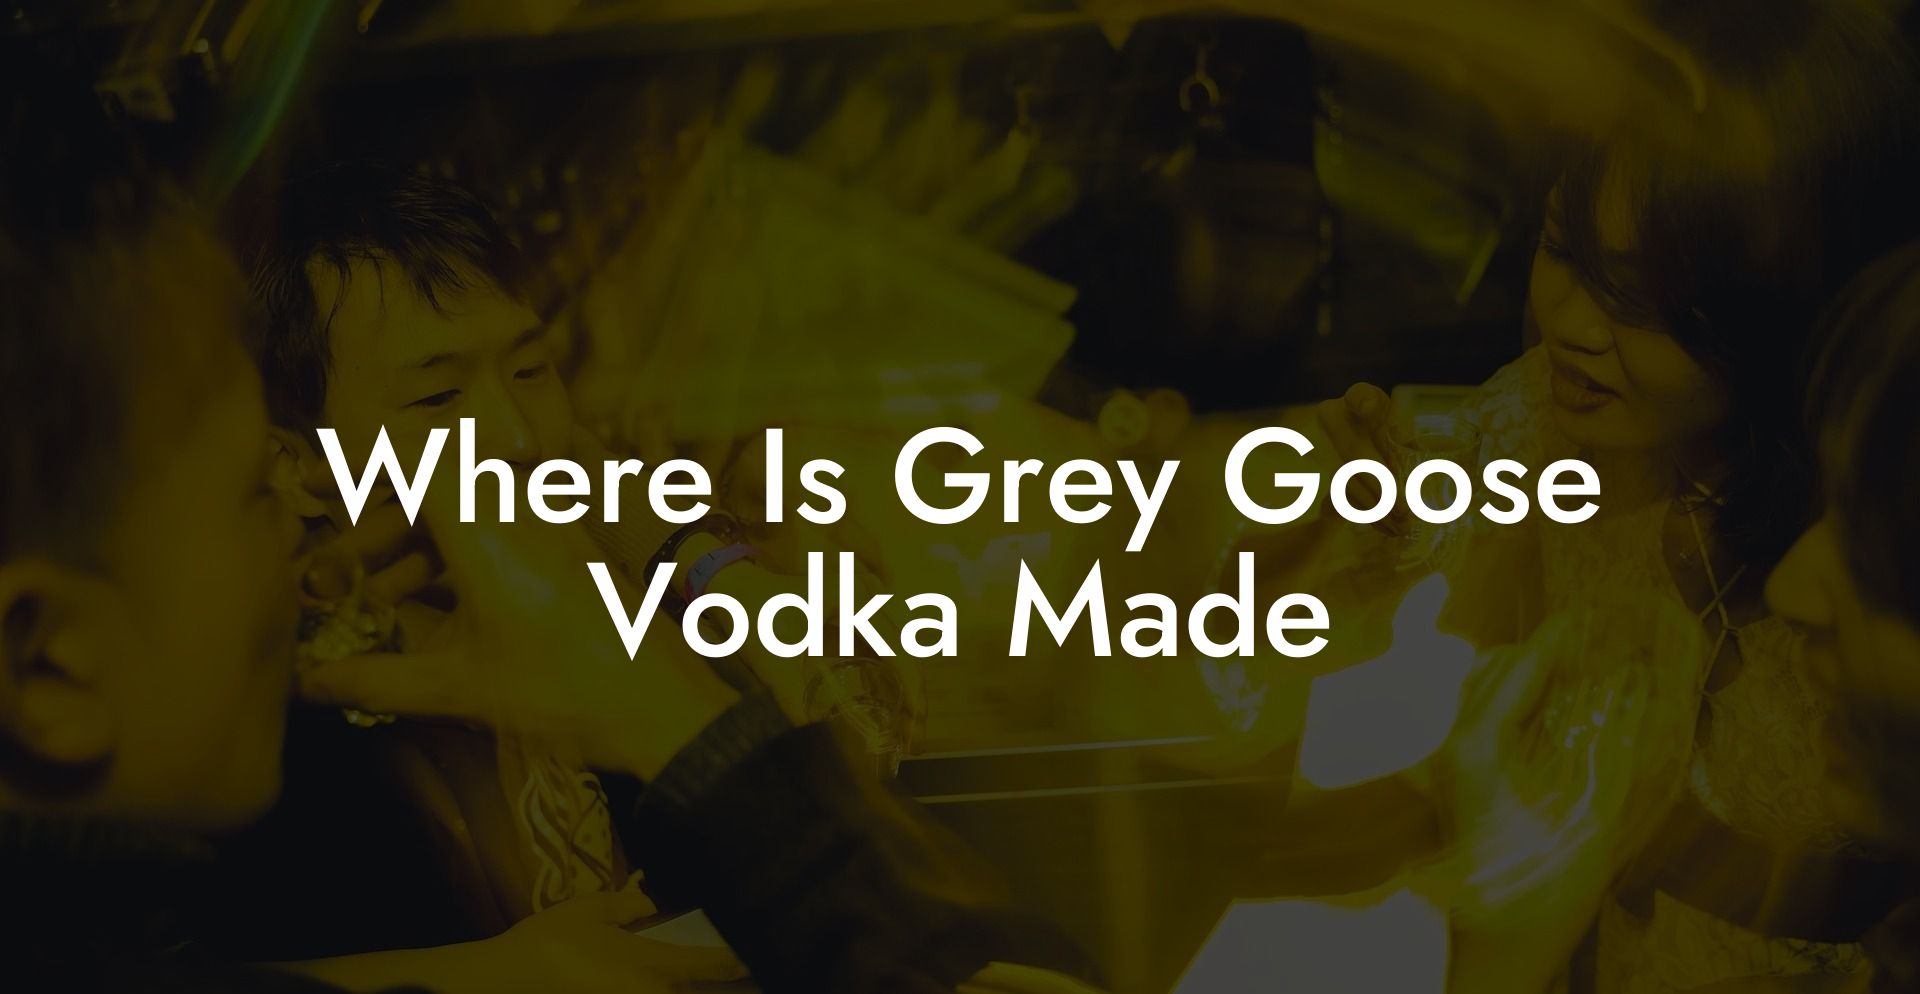 Where Is Grey Goose Vodka Made